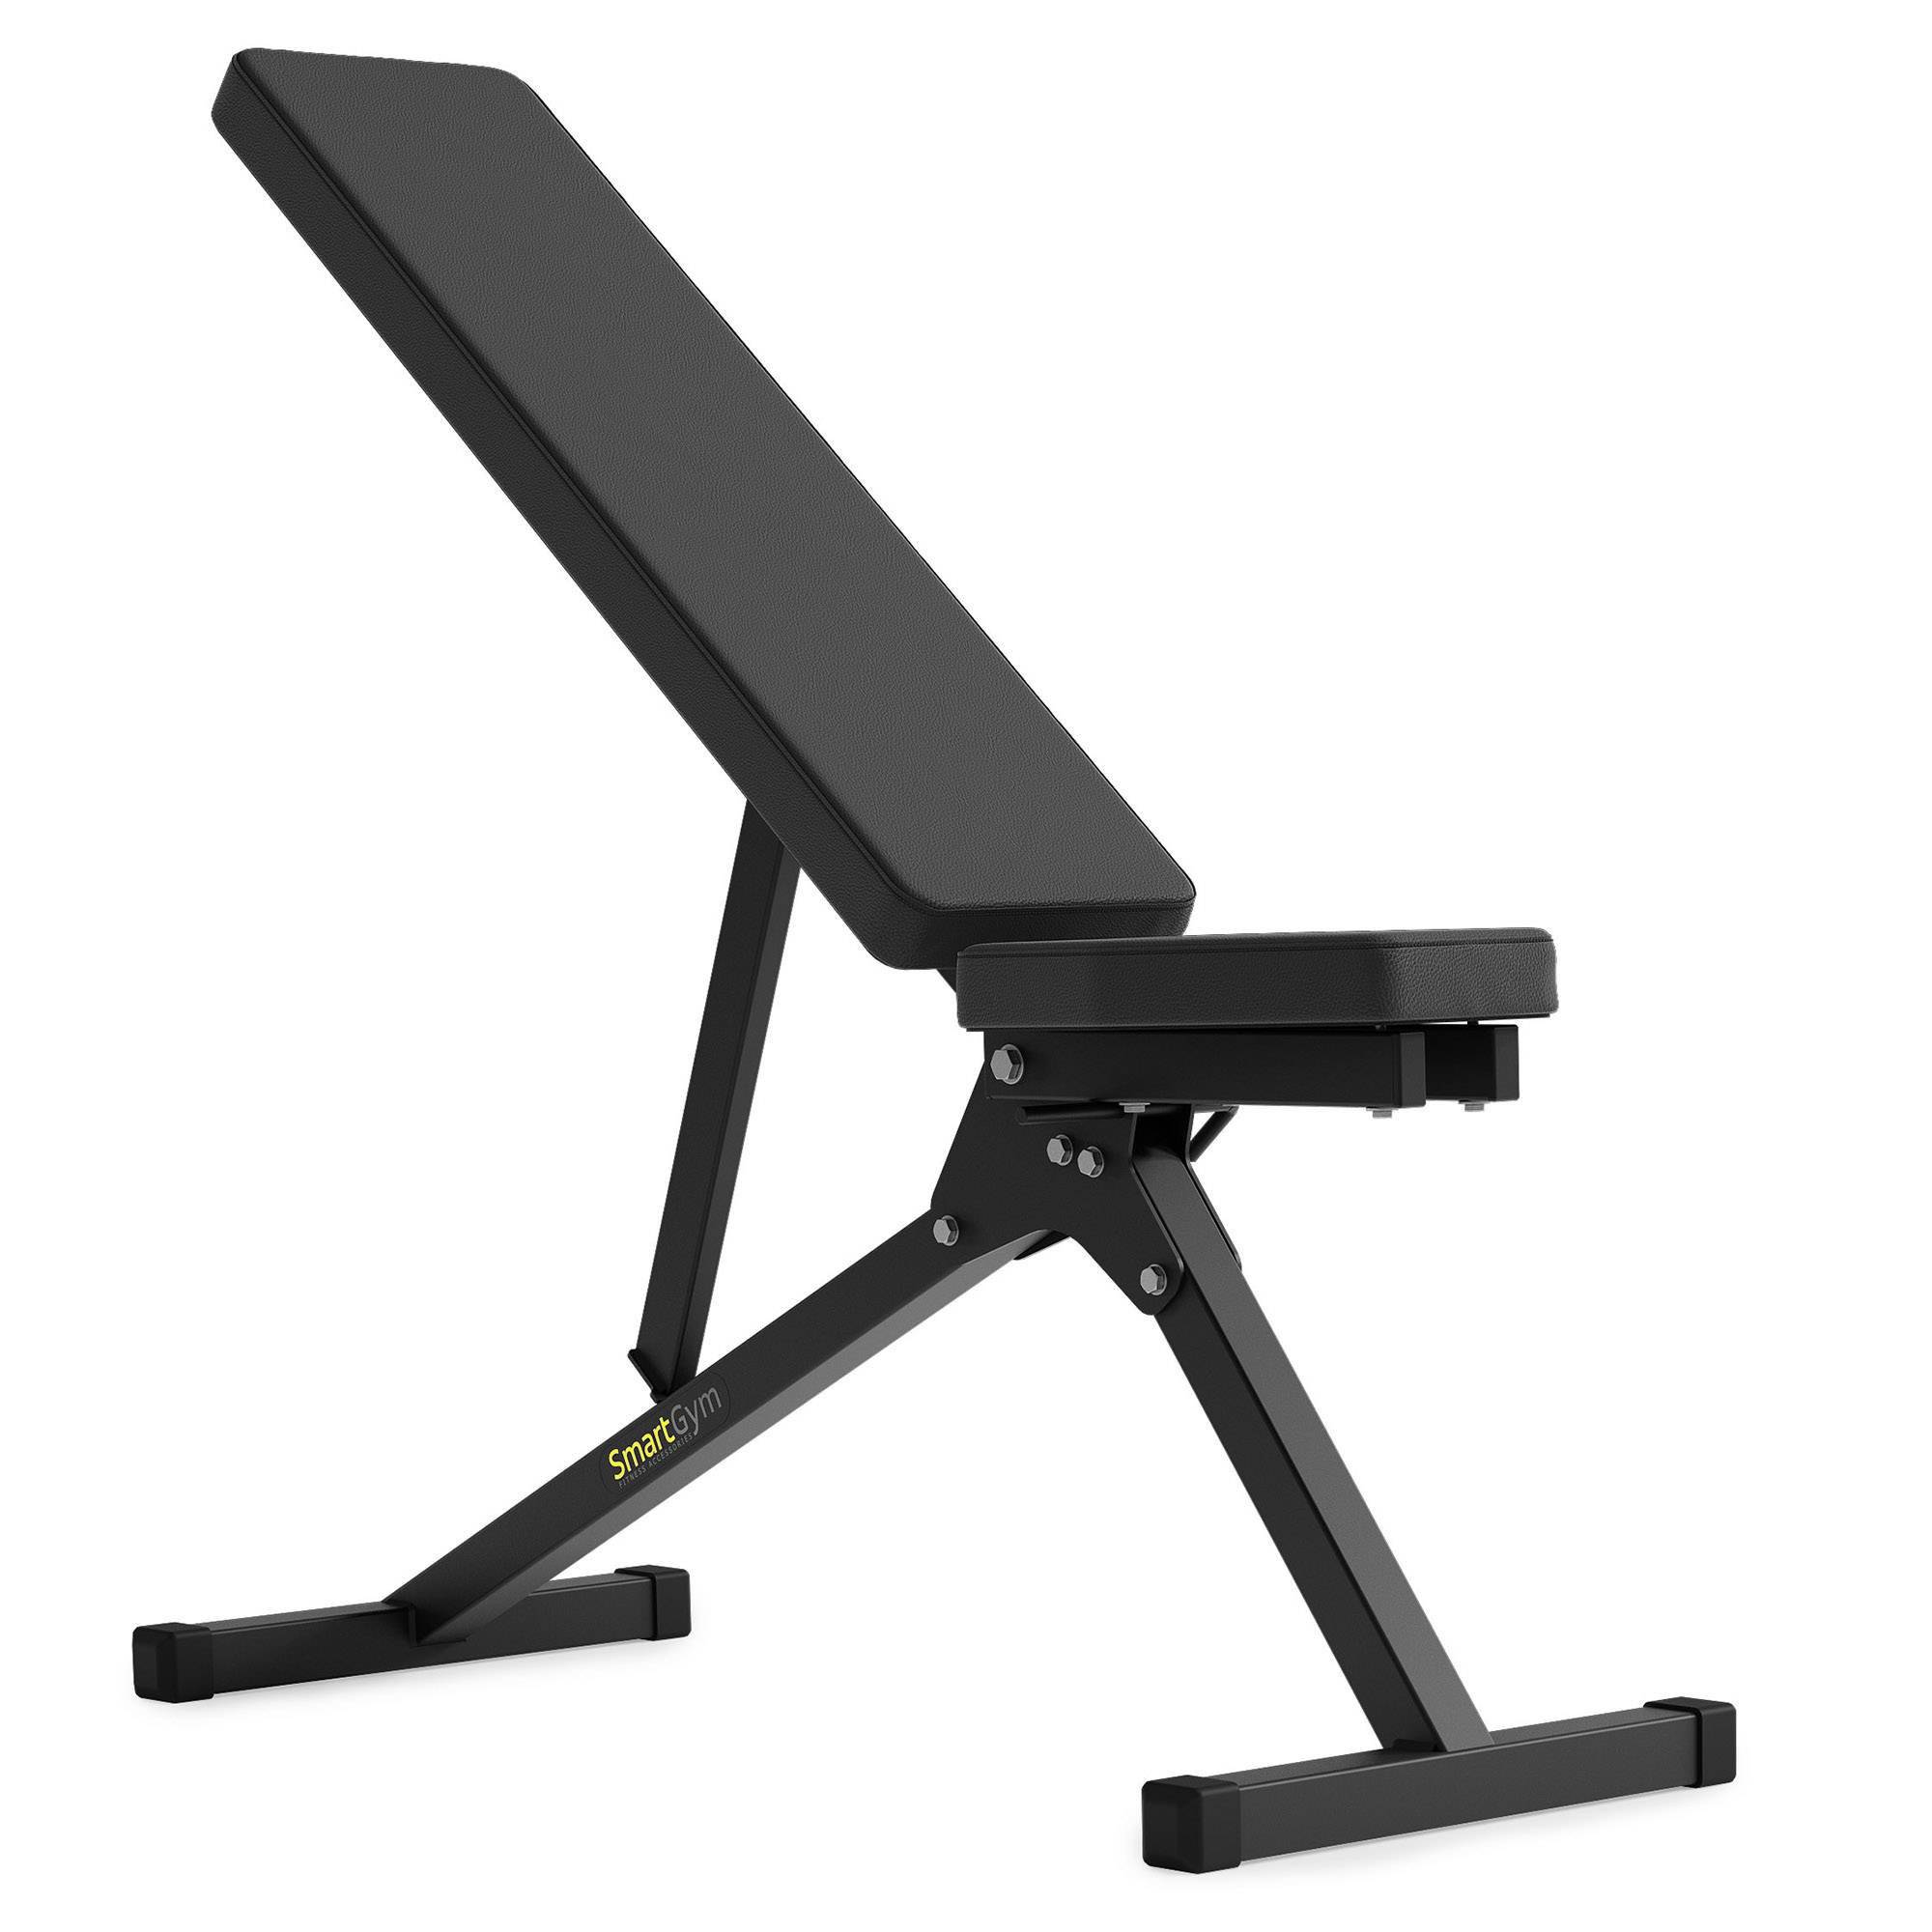 Adjustable bench SG-11 - SmartGym Fitness Accessories | Strength equipment  \\ Training benches \\ Benches | Sonnenbrillen